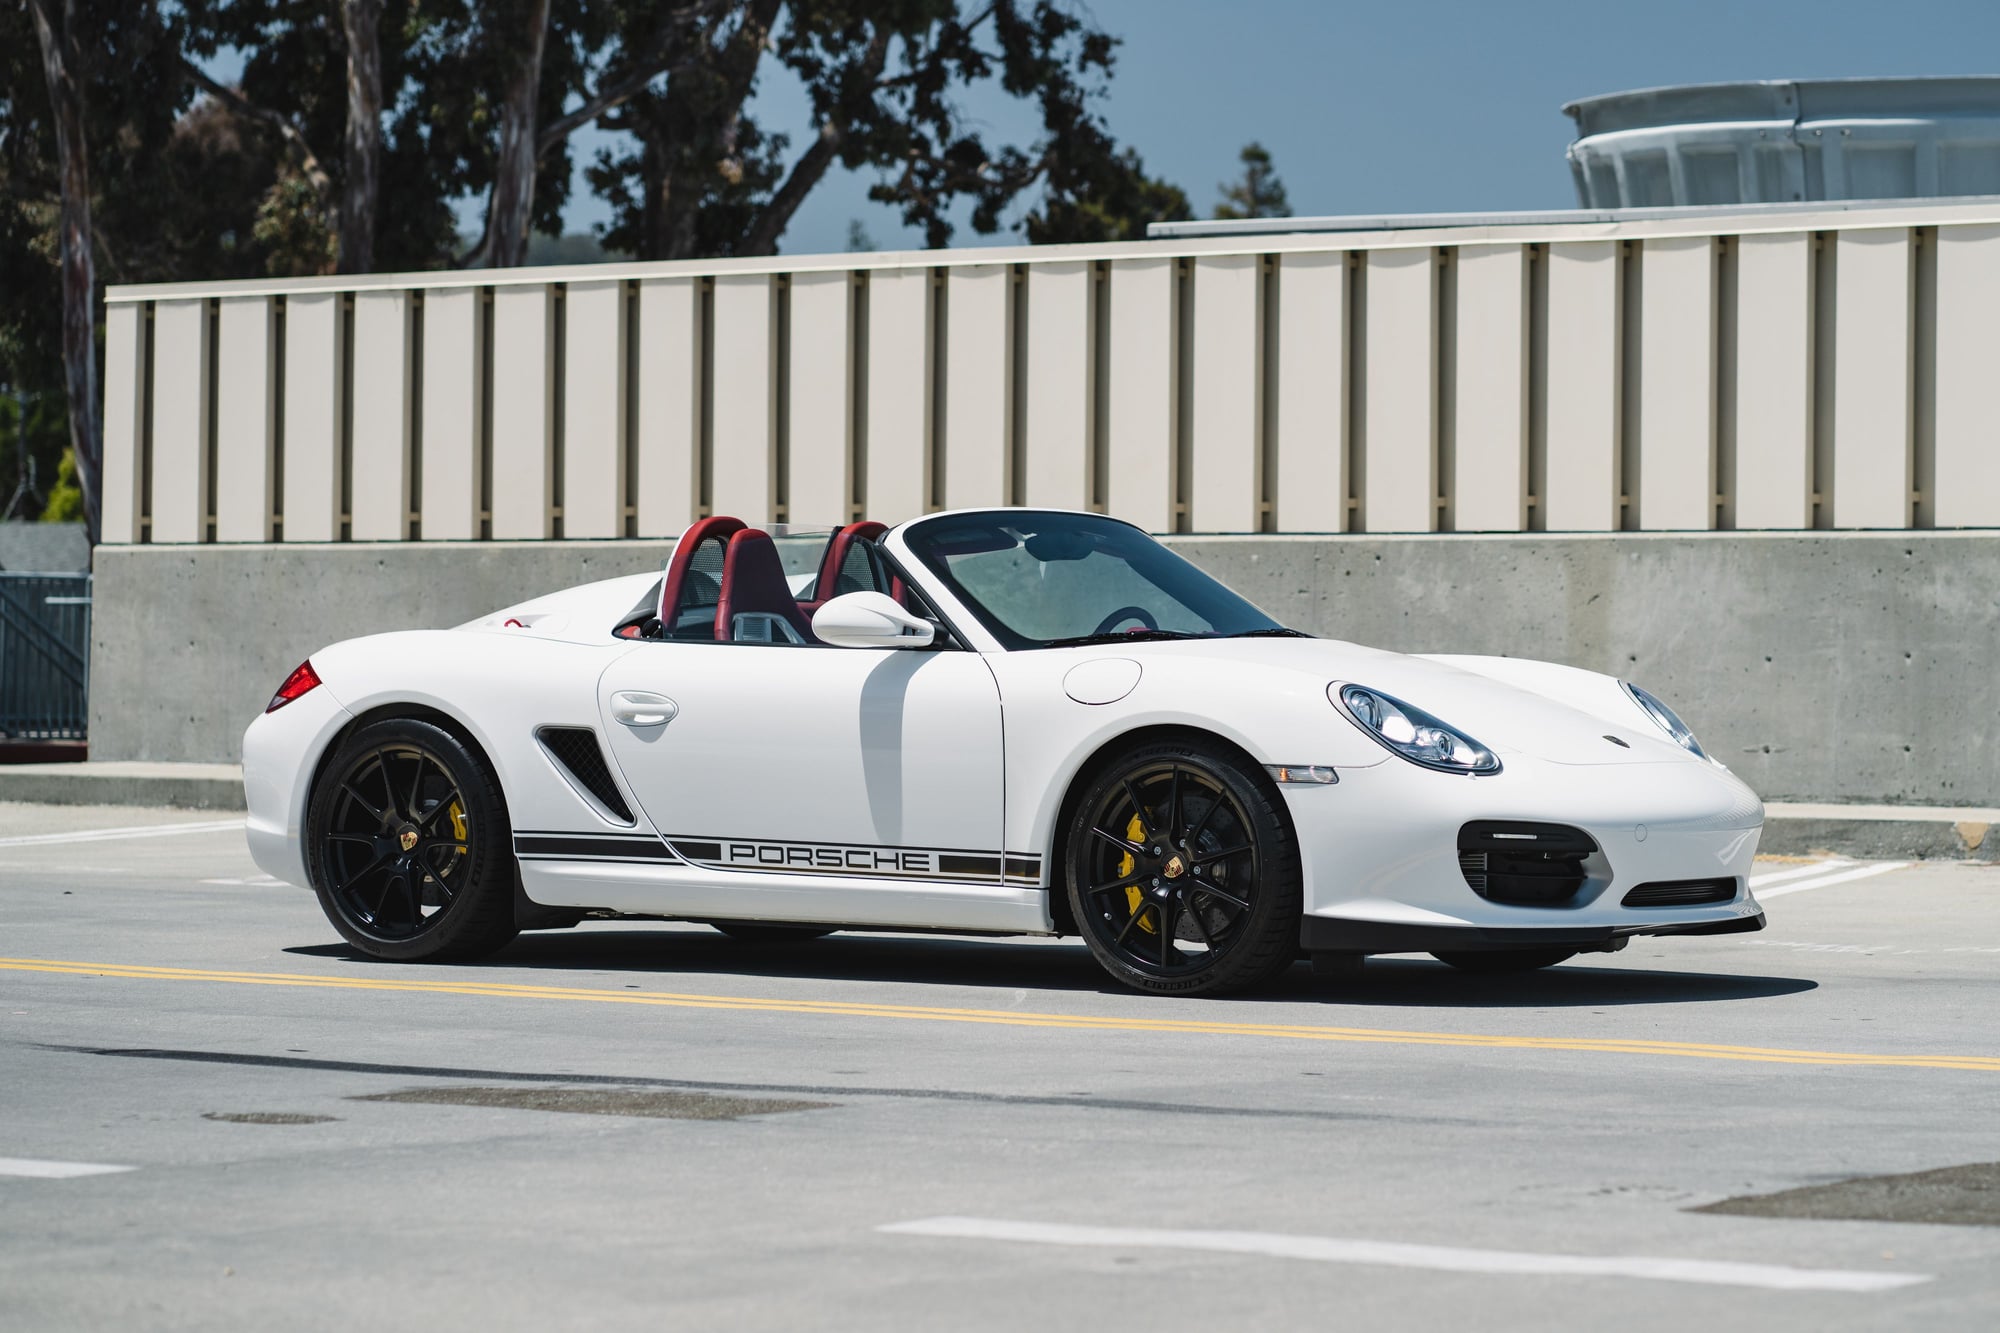 2011 Porsche Boxster - 2011 Boxster Spyder w/ 5k Miles, Folding Carbon Buckets and Over $30k in Options - Used - VIN WP0CB2A89BS745540 - 5,306 Miles - 6 cyl - 2WD - Manual - Convertible - White - Redwood City, CA 94063, United States